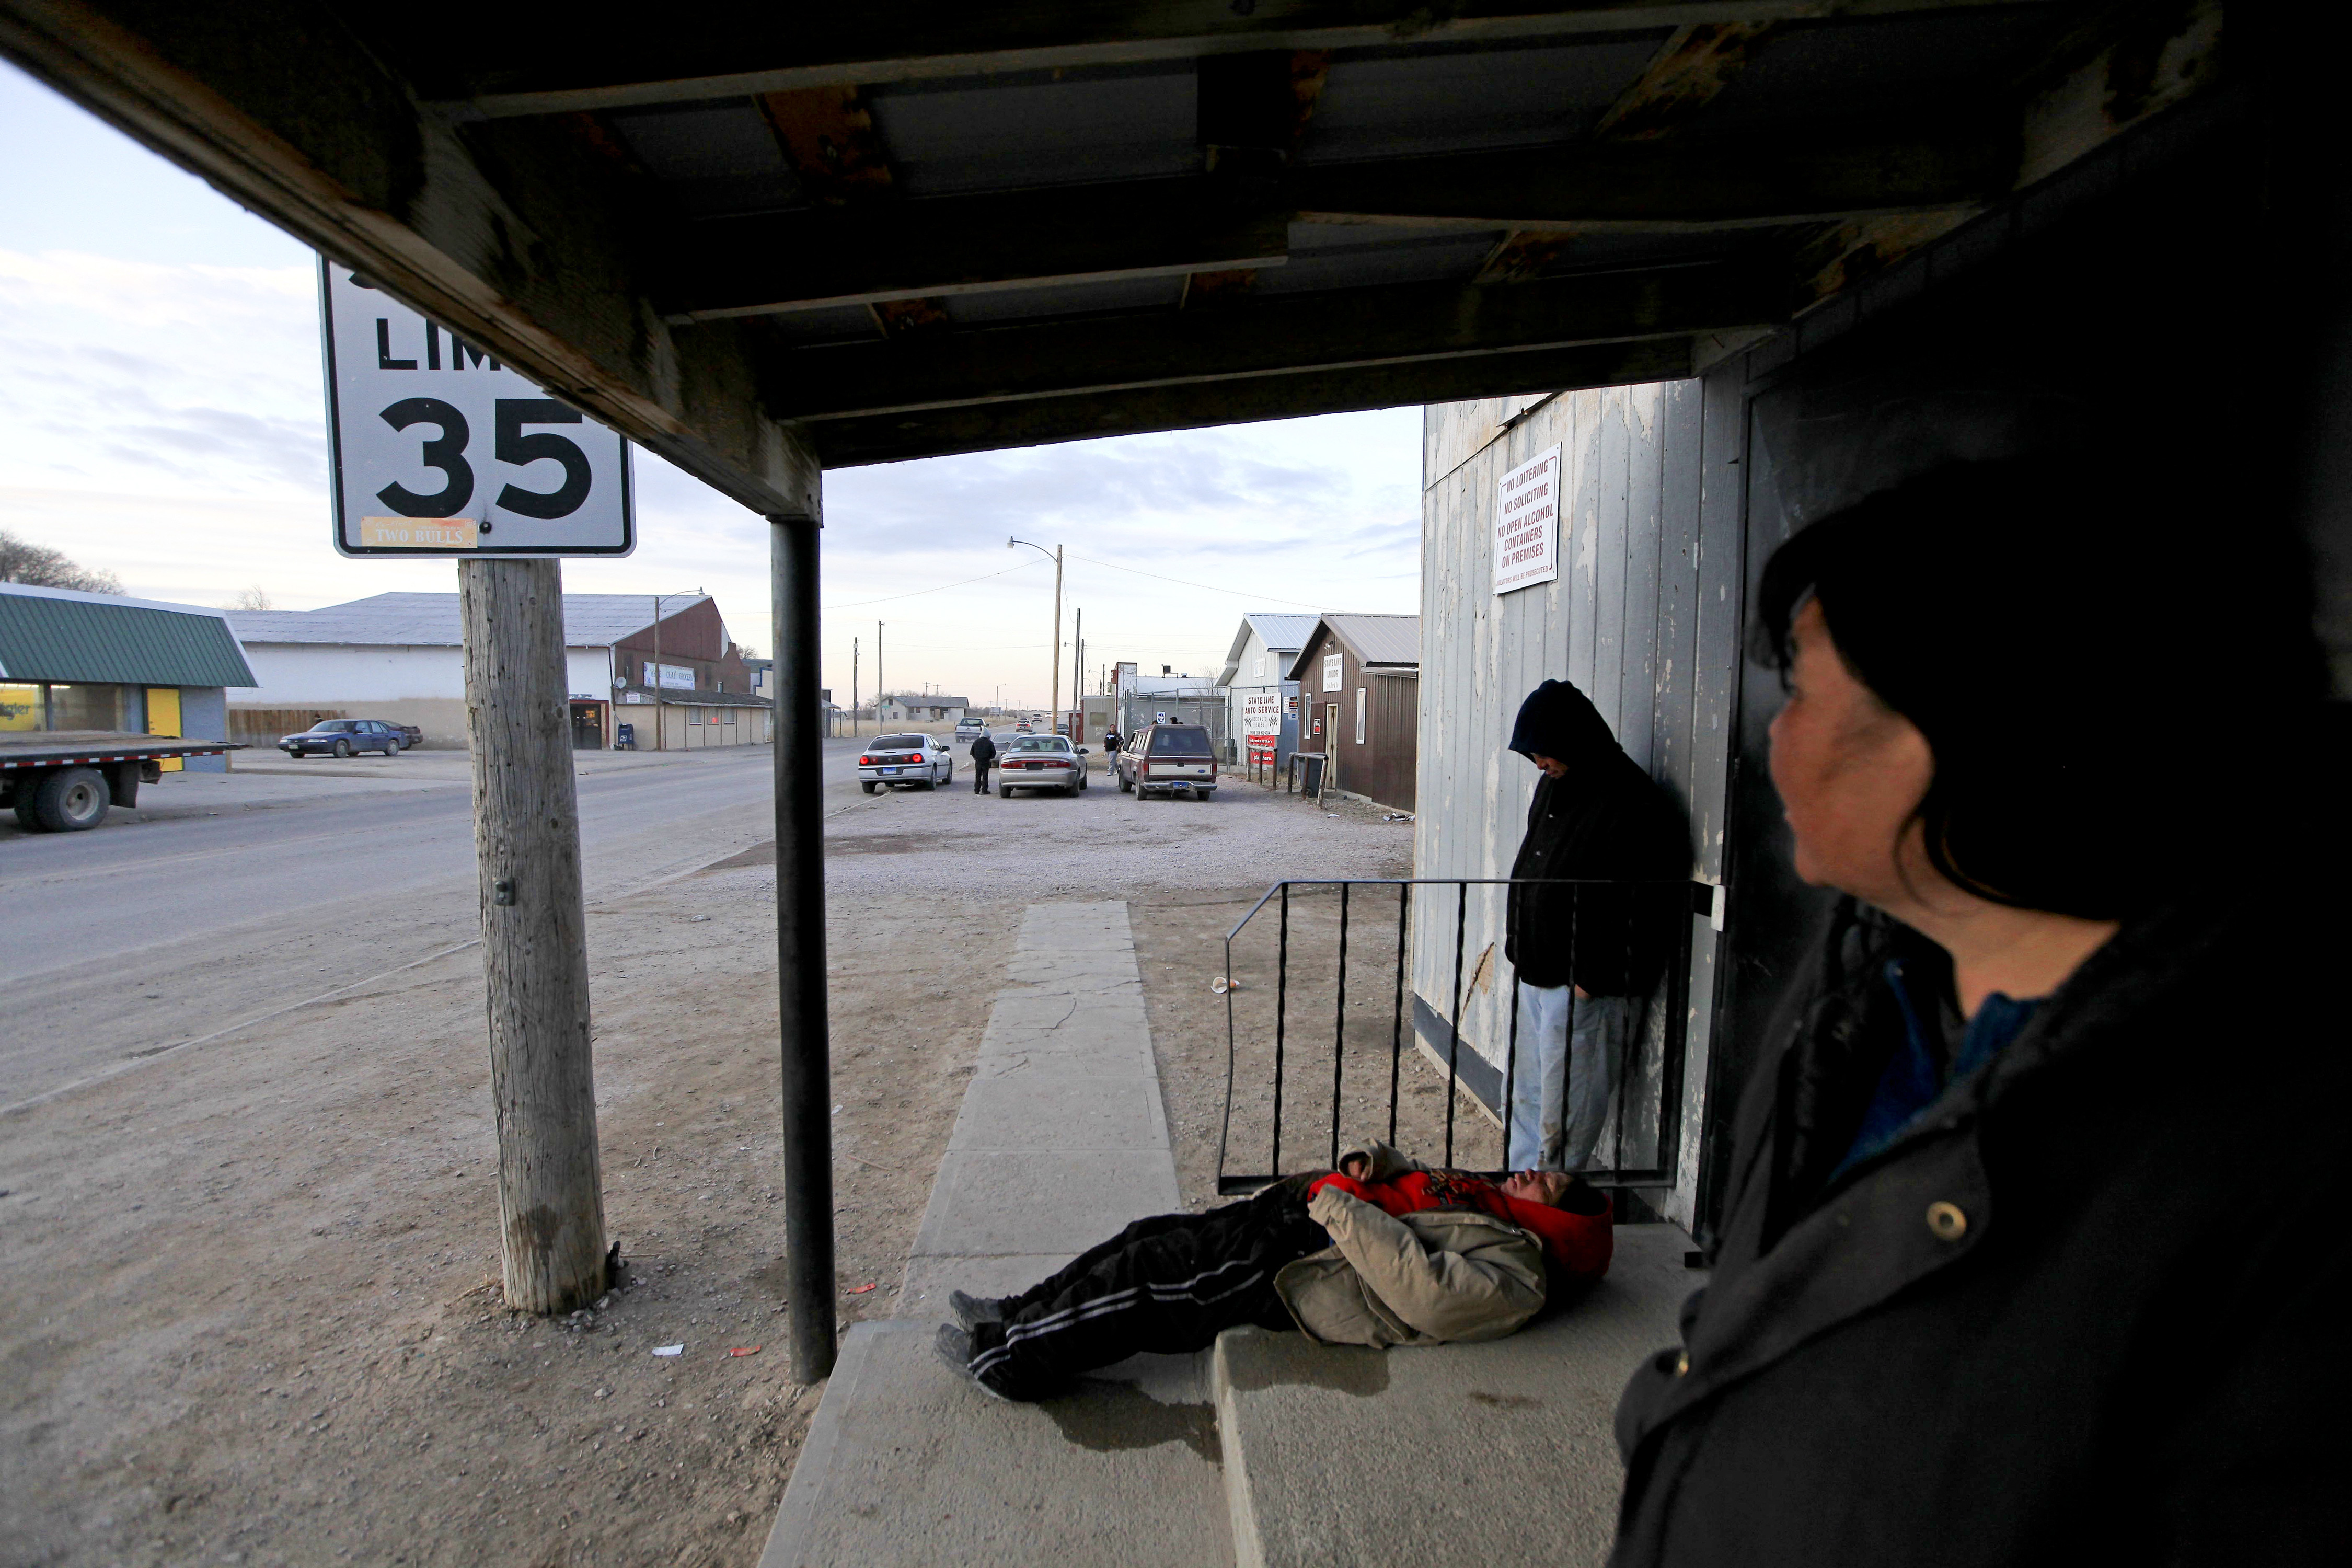 Residents from Pine Ridge Reservation, S.D., in various states of inebriation  outside a store located immediately across the border in Whiteclay, Neb., Feb. 17, 2012.